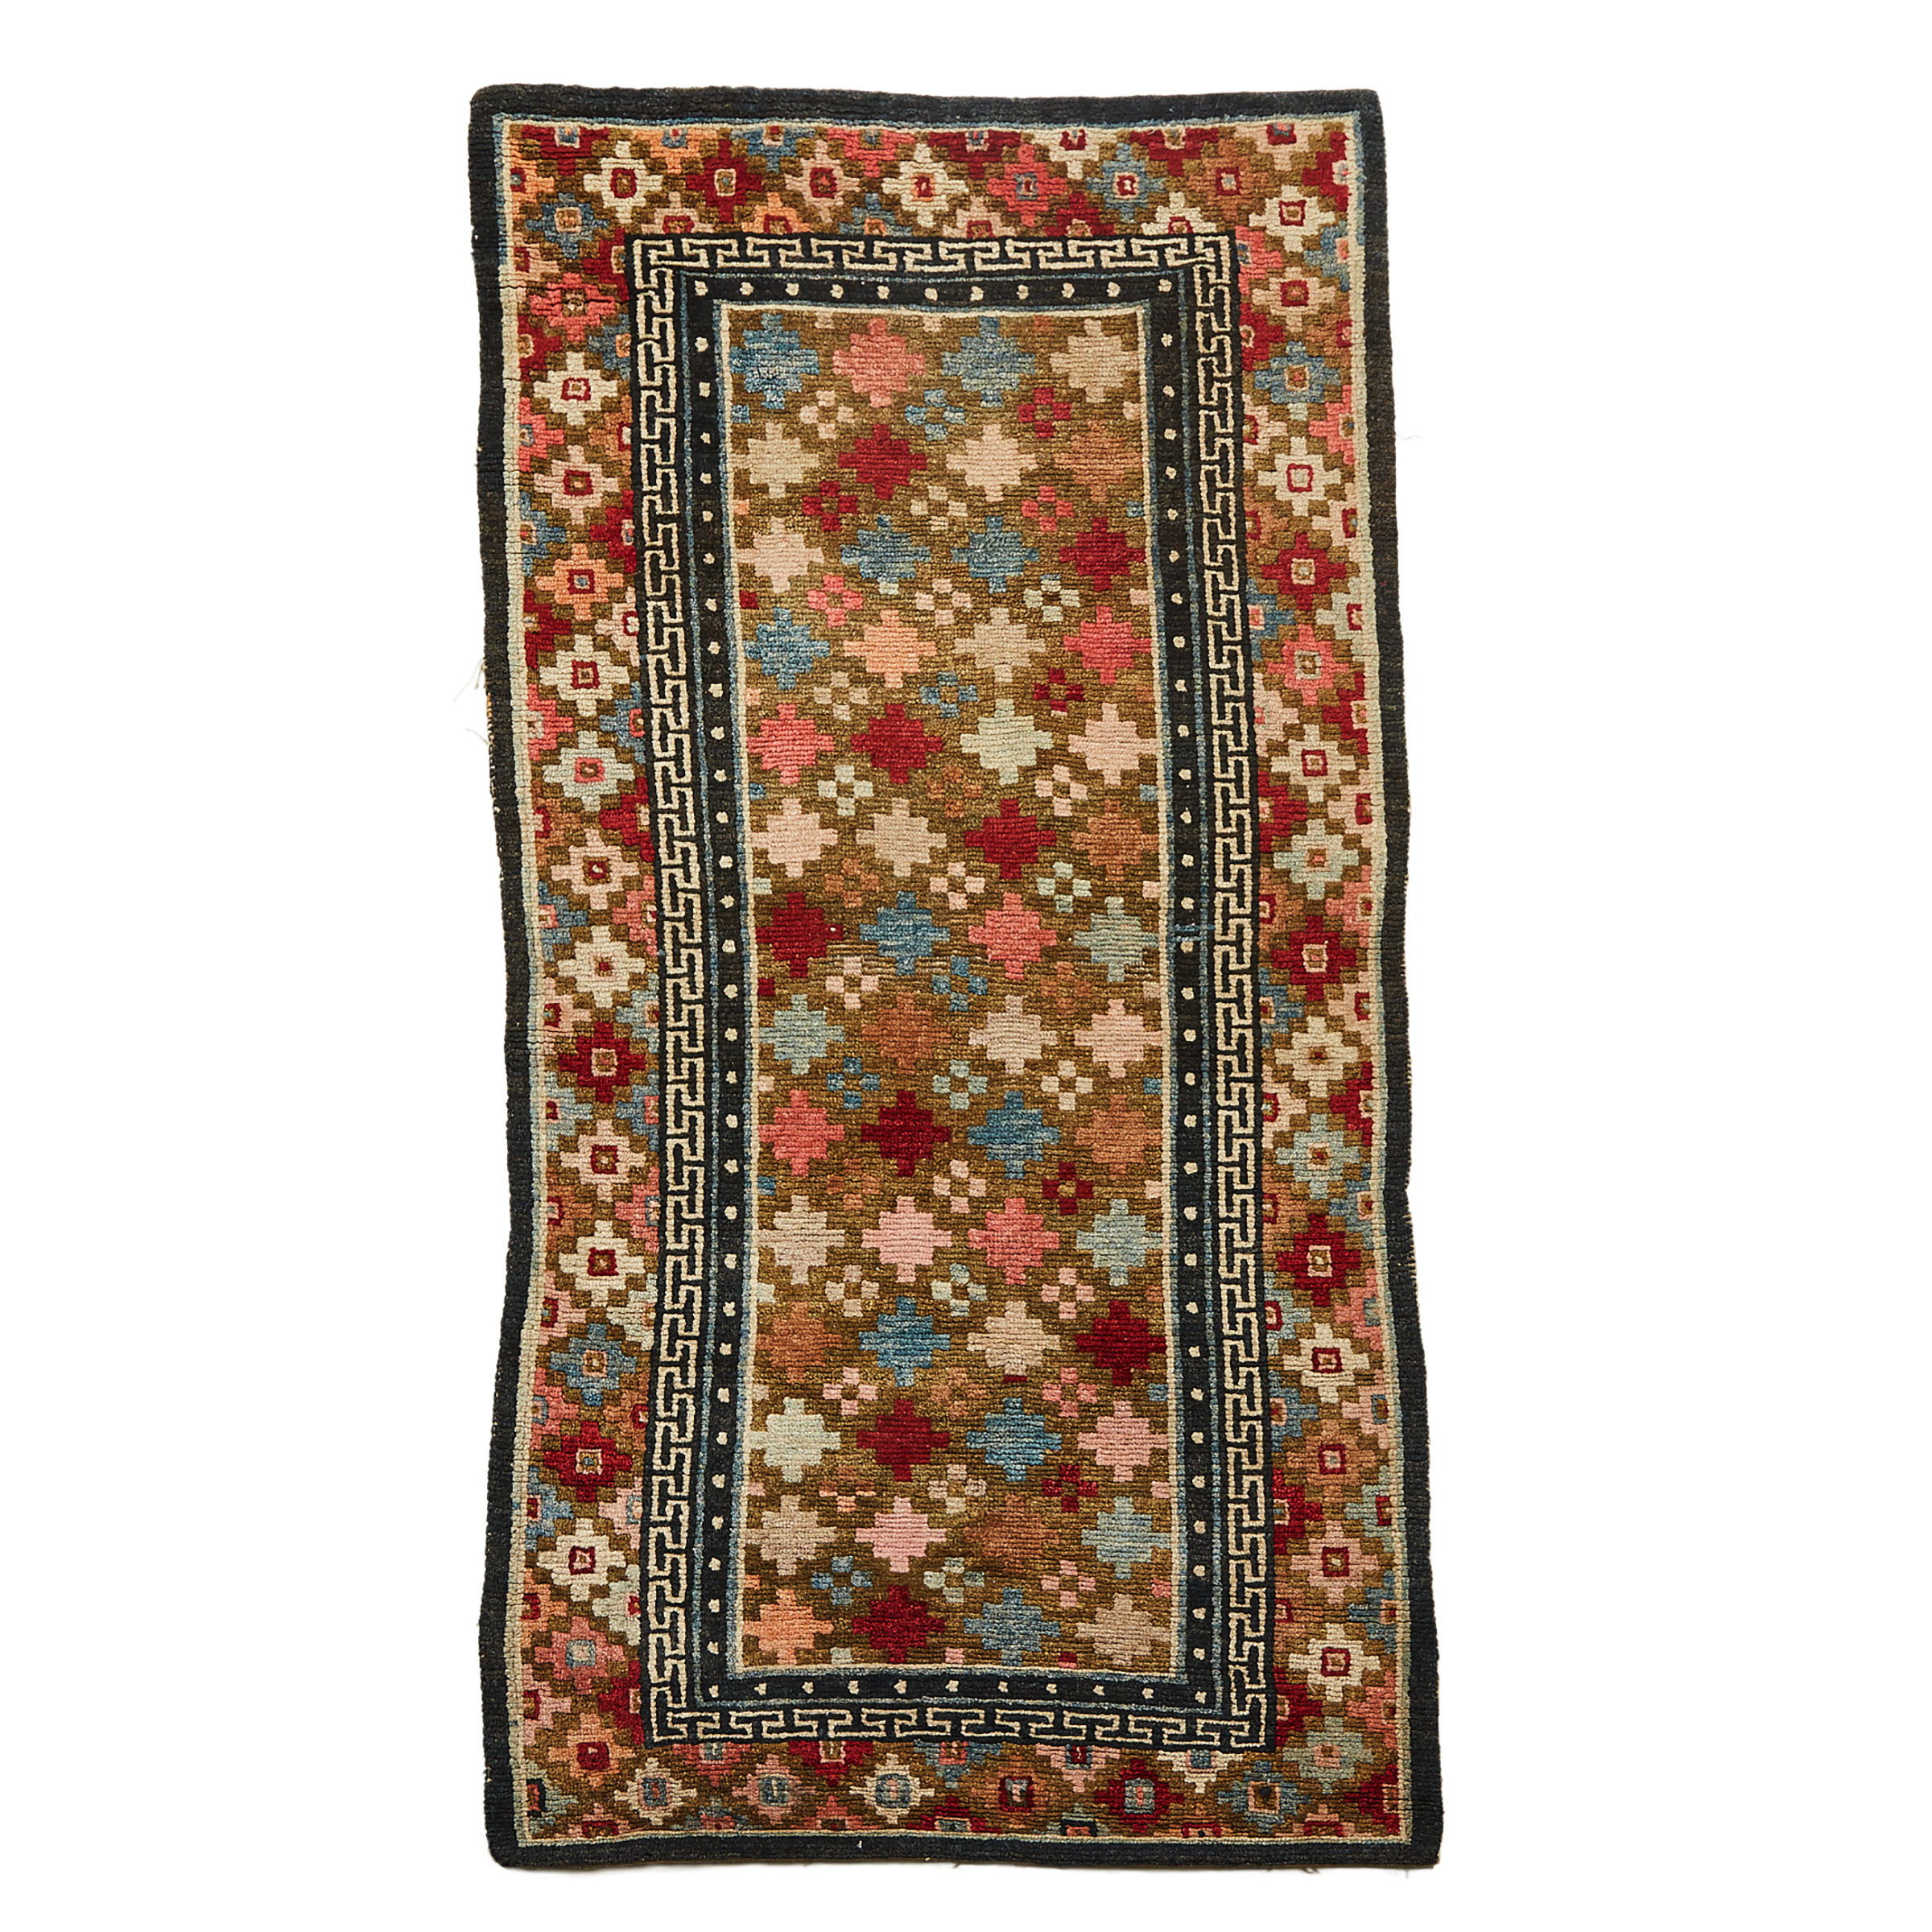 Chinese Cross Form Design Rug, early 20th century